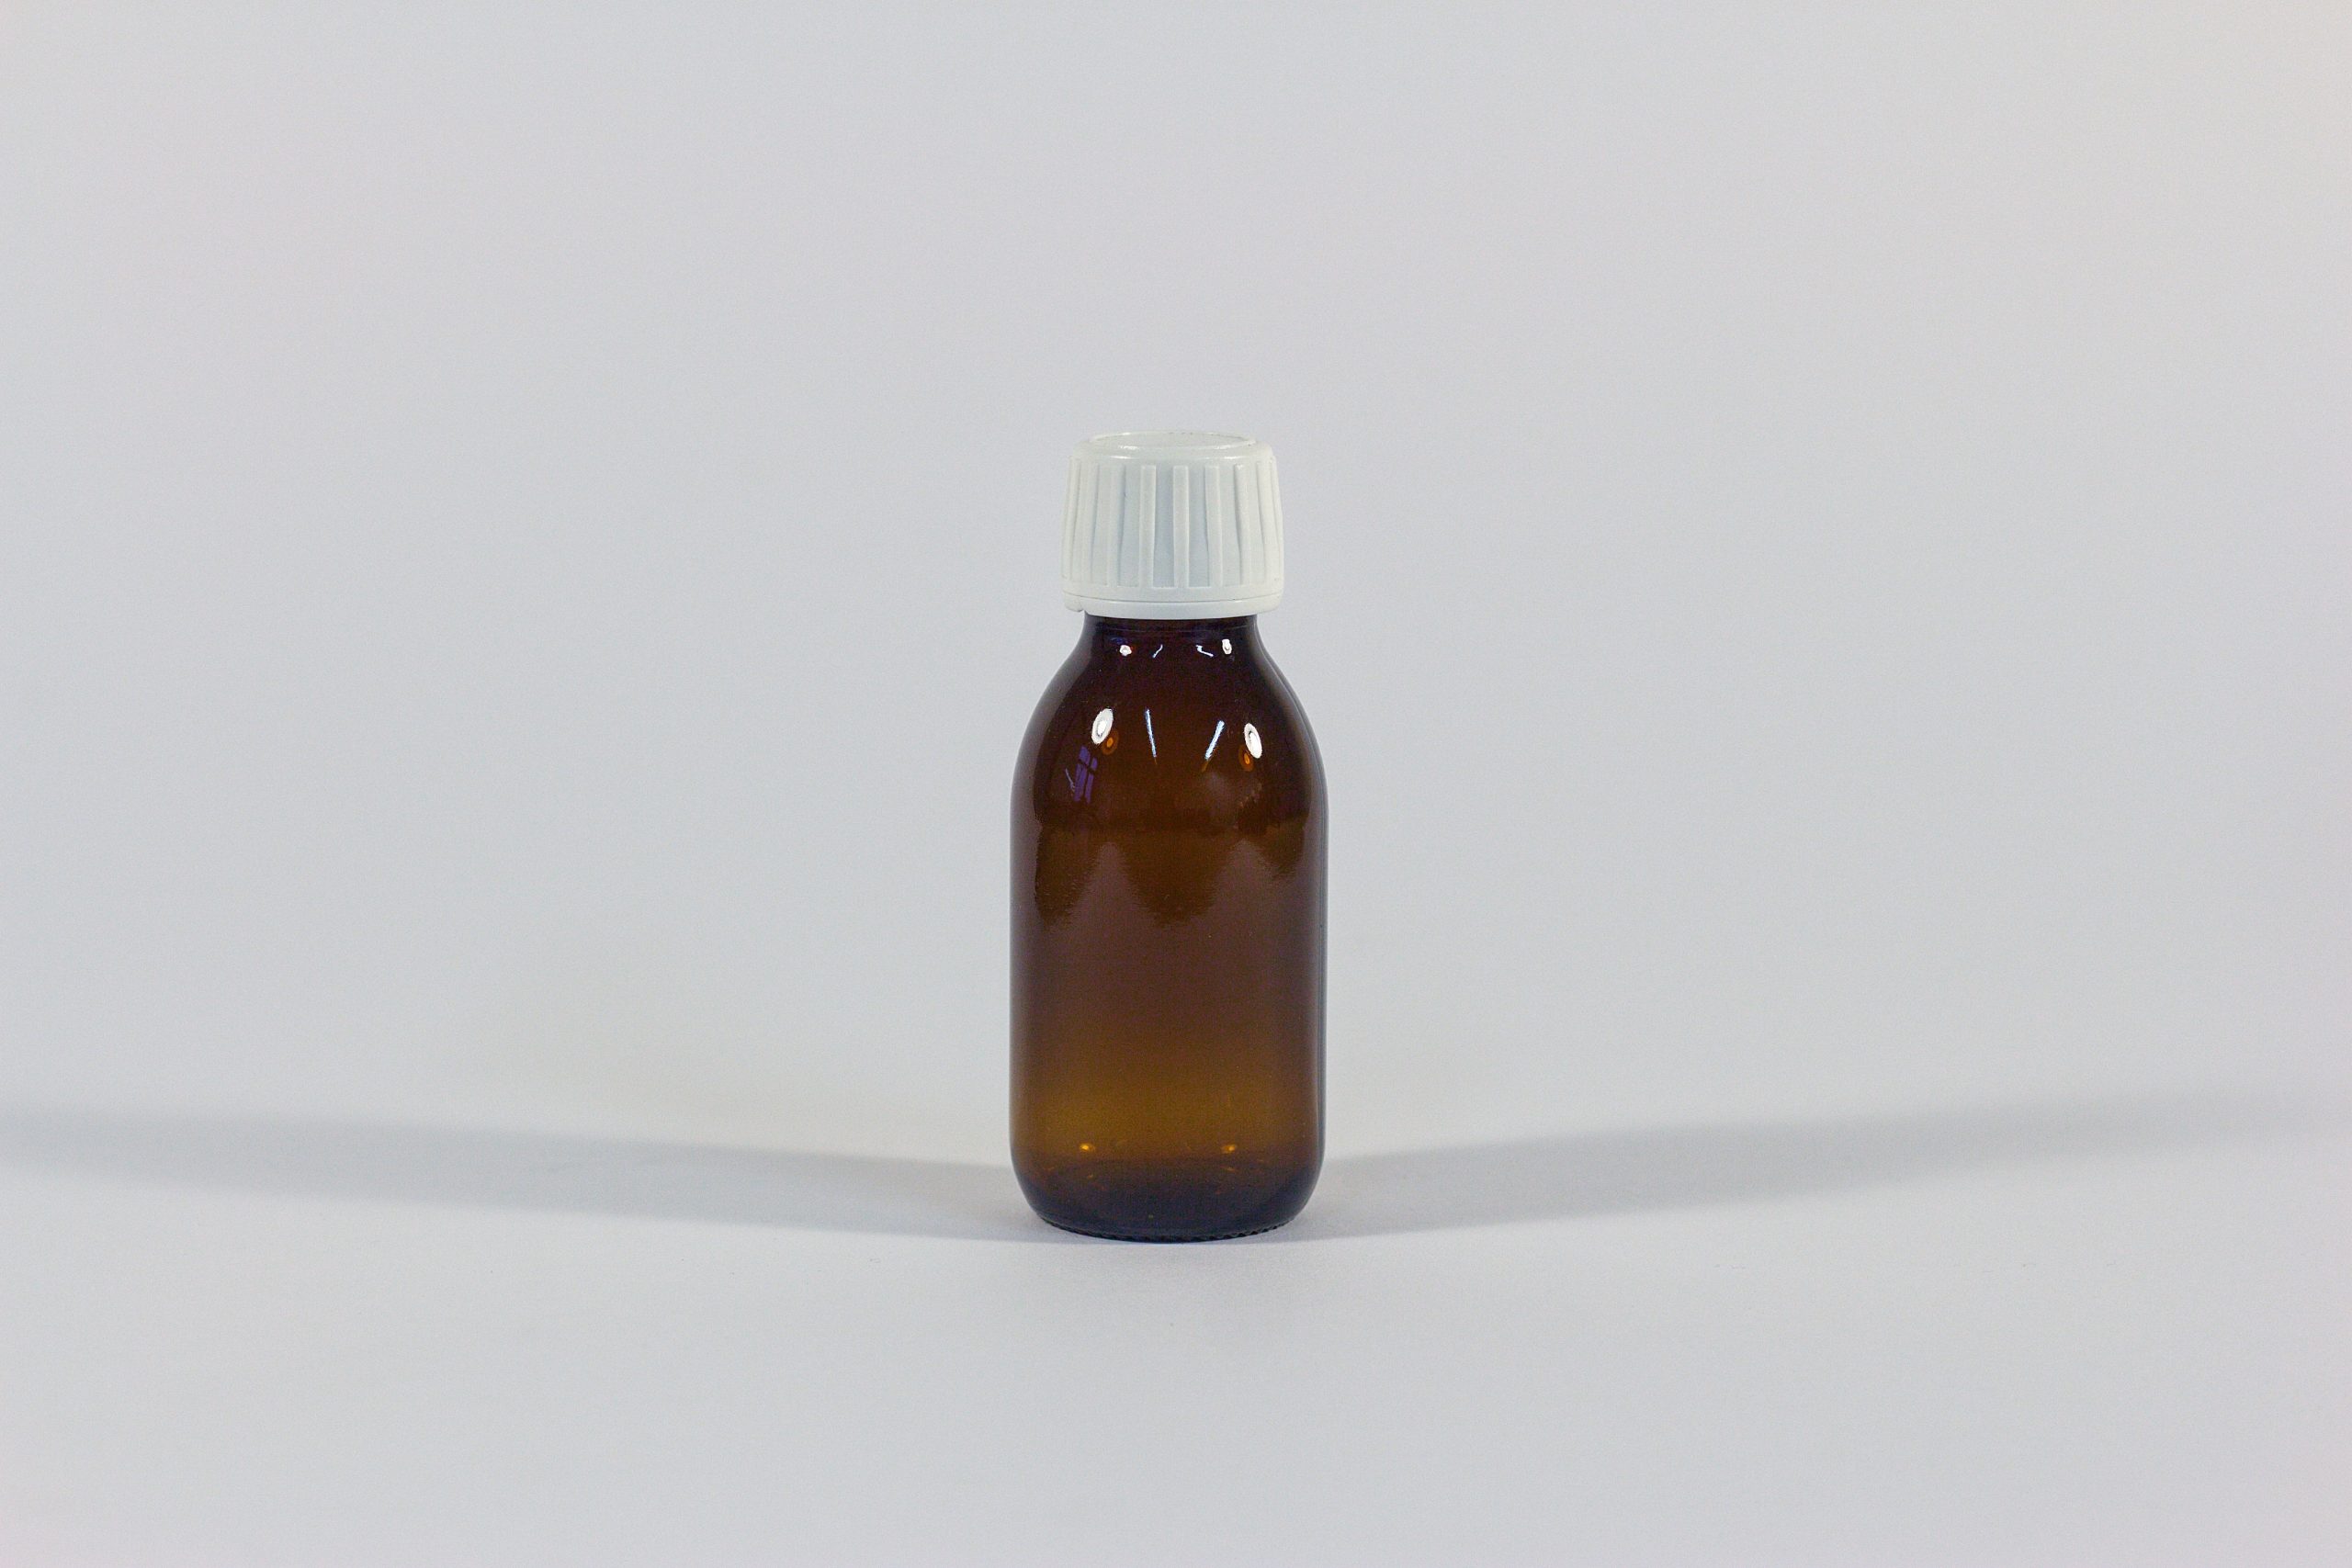 100ml amber glass bottle with white cap. From or glass packging range.